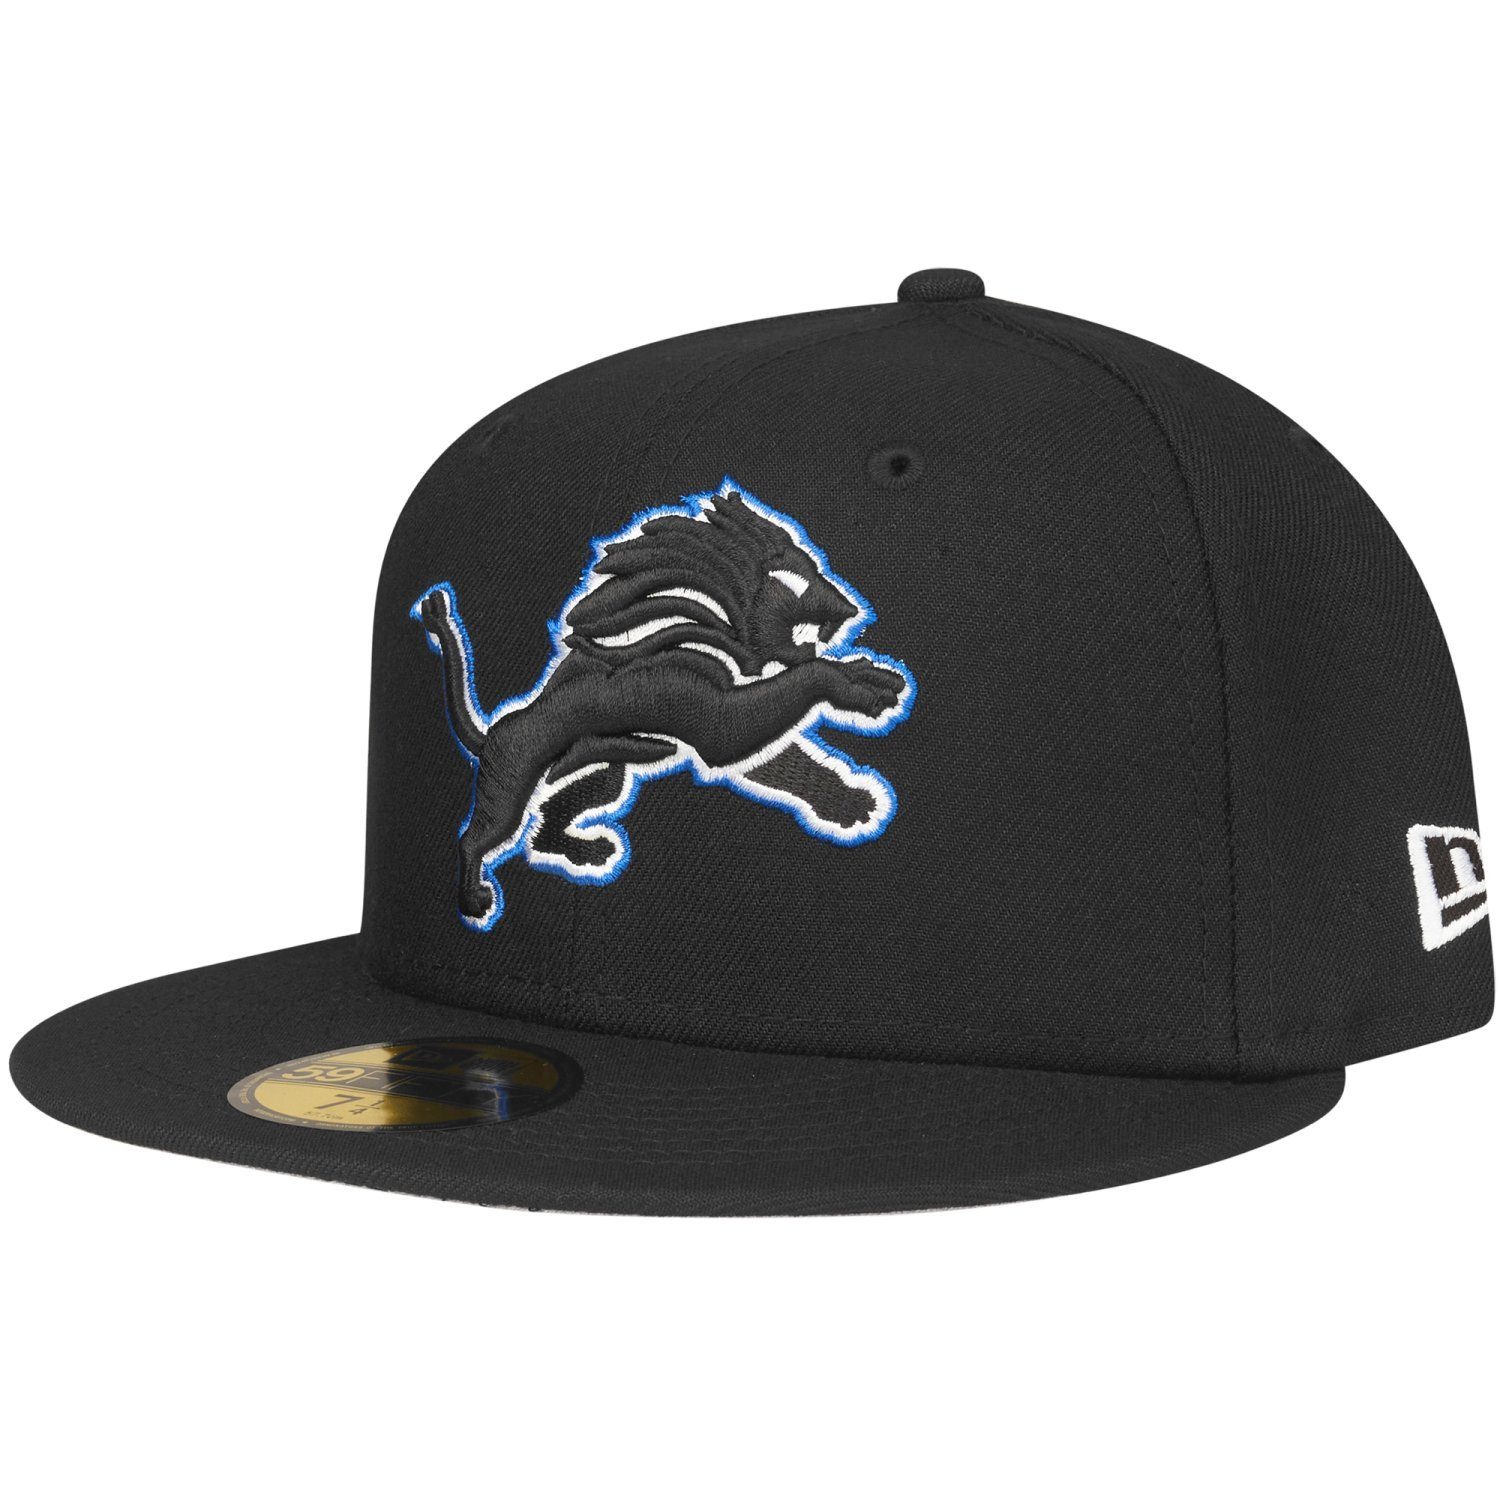 New Era Fitted Cap 59Fifty NFL TEAMS Detroit Lions